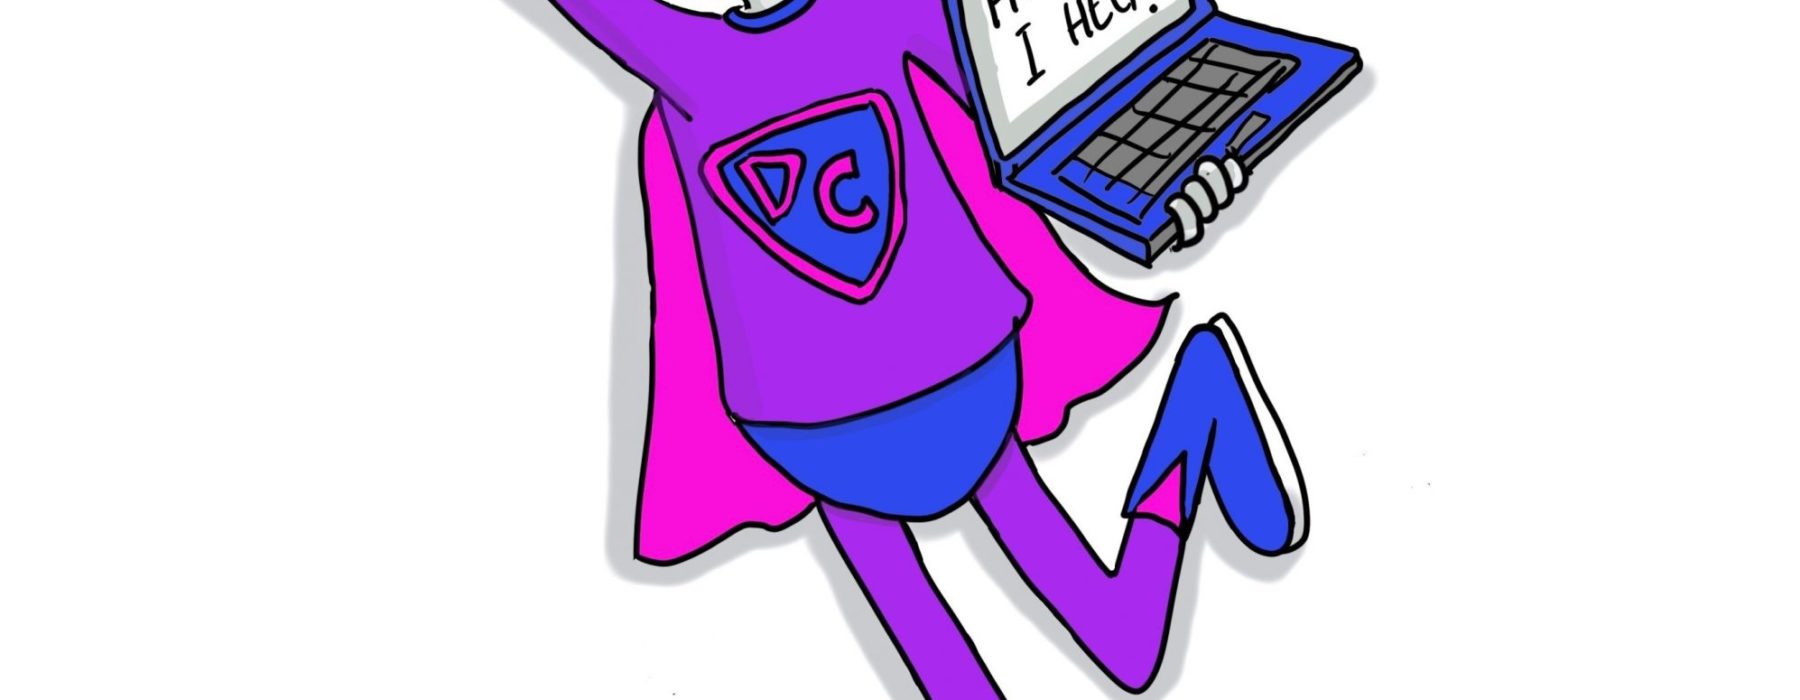 A Digital Champion superhero cartoon. The DC is dressed as a typical superhero and carries a laptop with "How can I help?" on the screen and a smartphone with "Hi there!" on its screen.